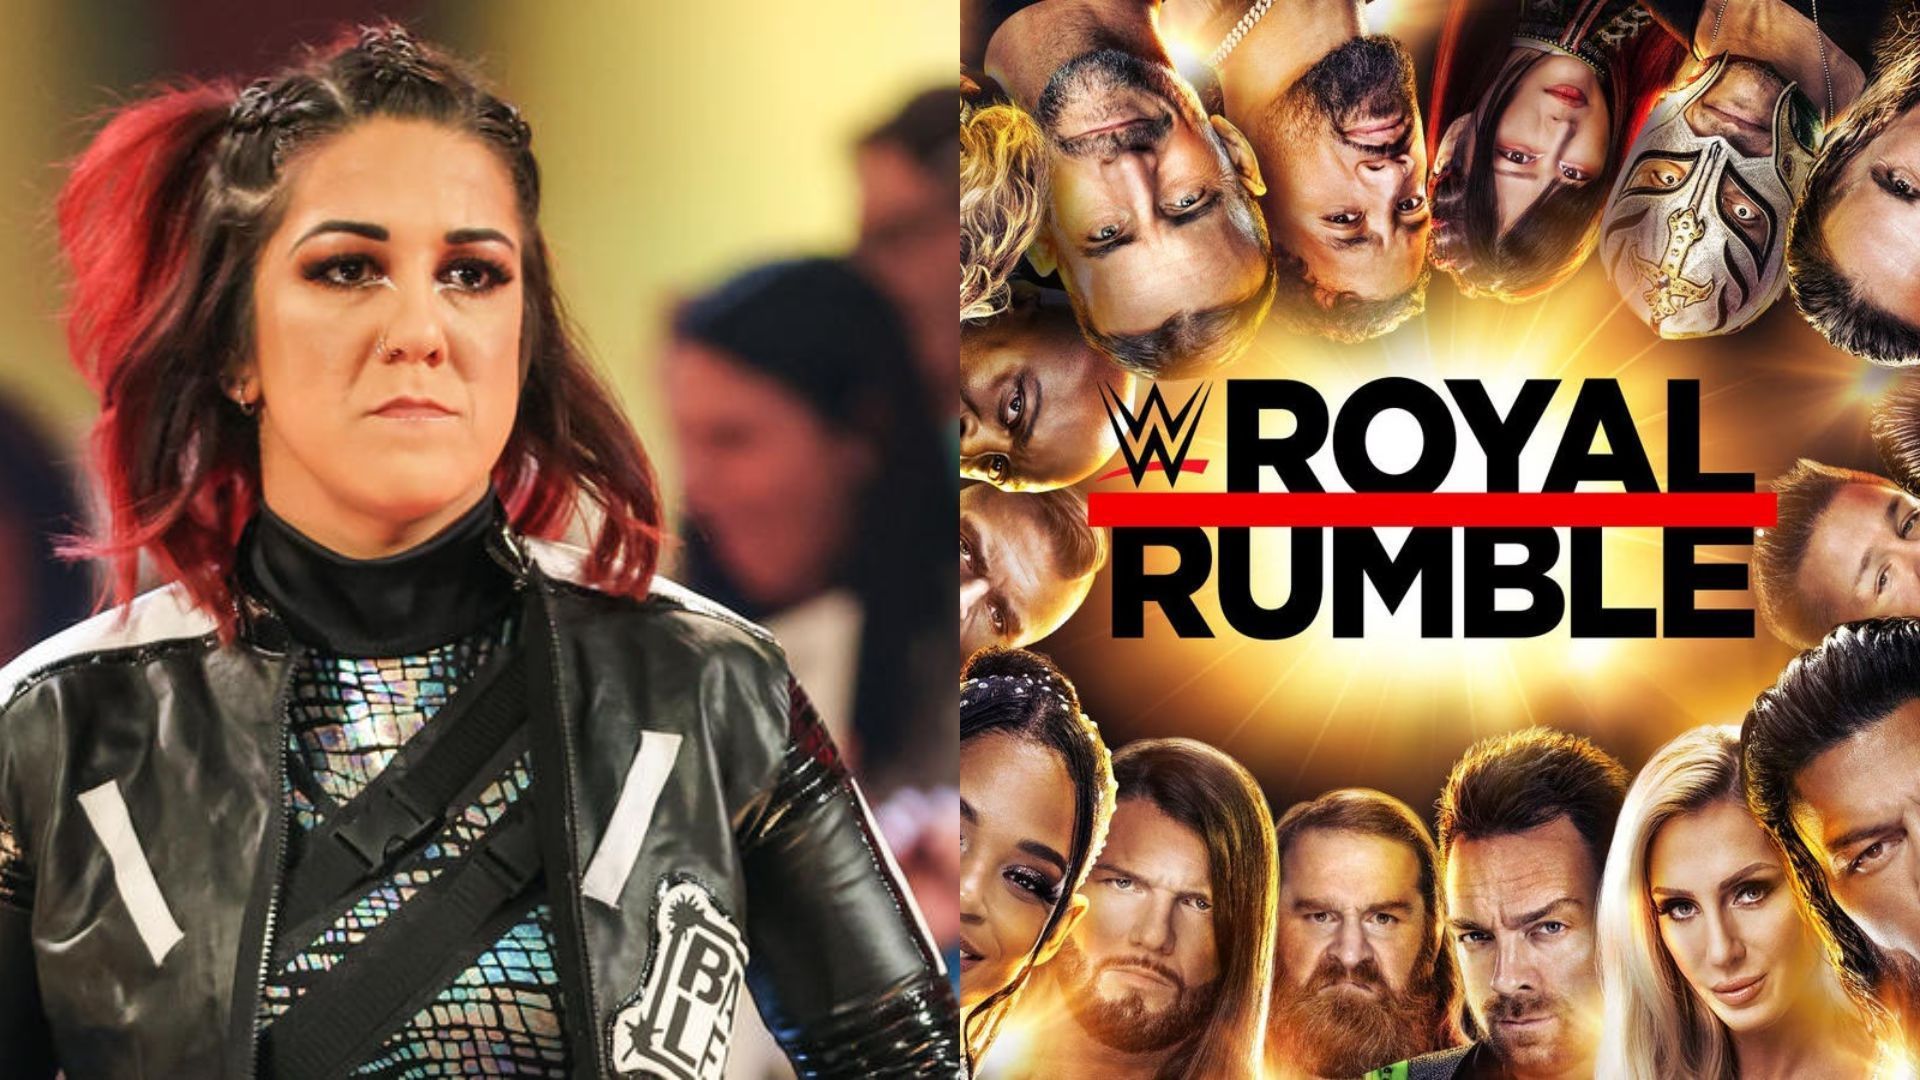 Bayley was surprised with the shocking debut at WWE Royal Rumble